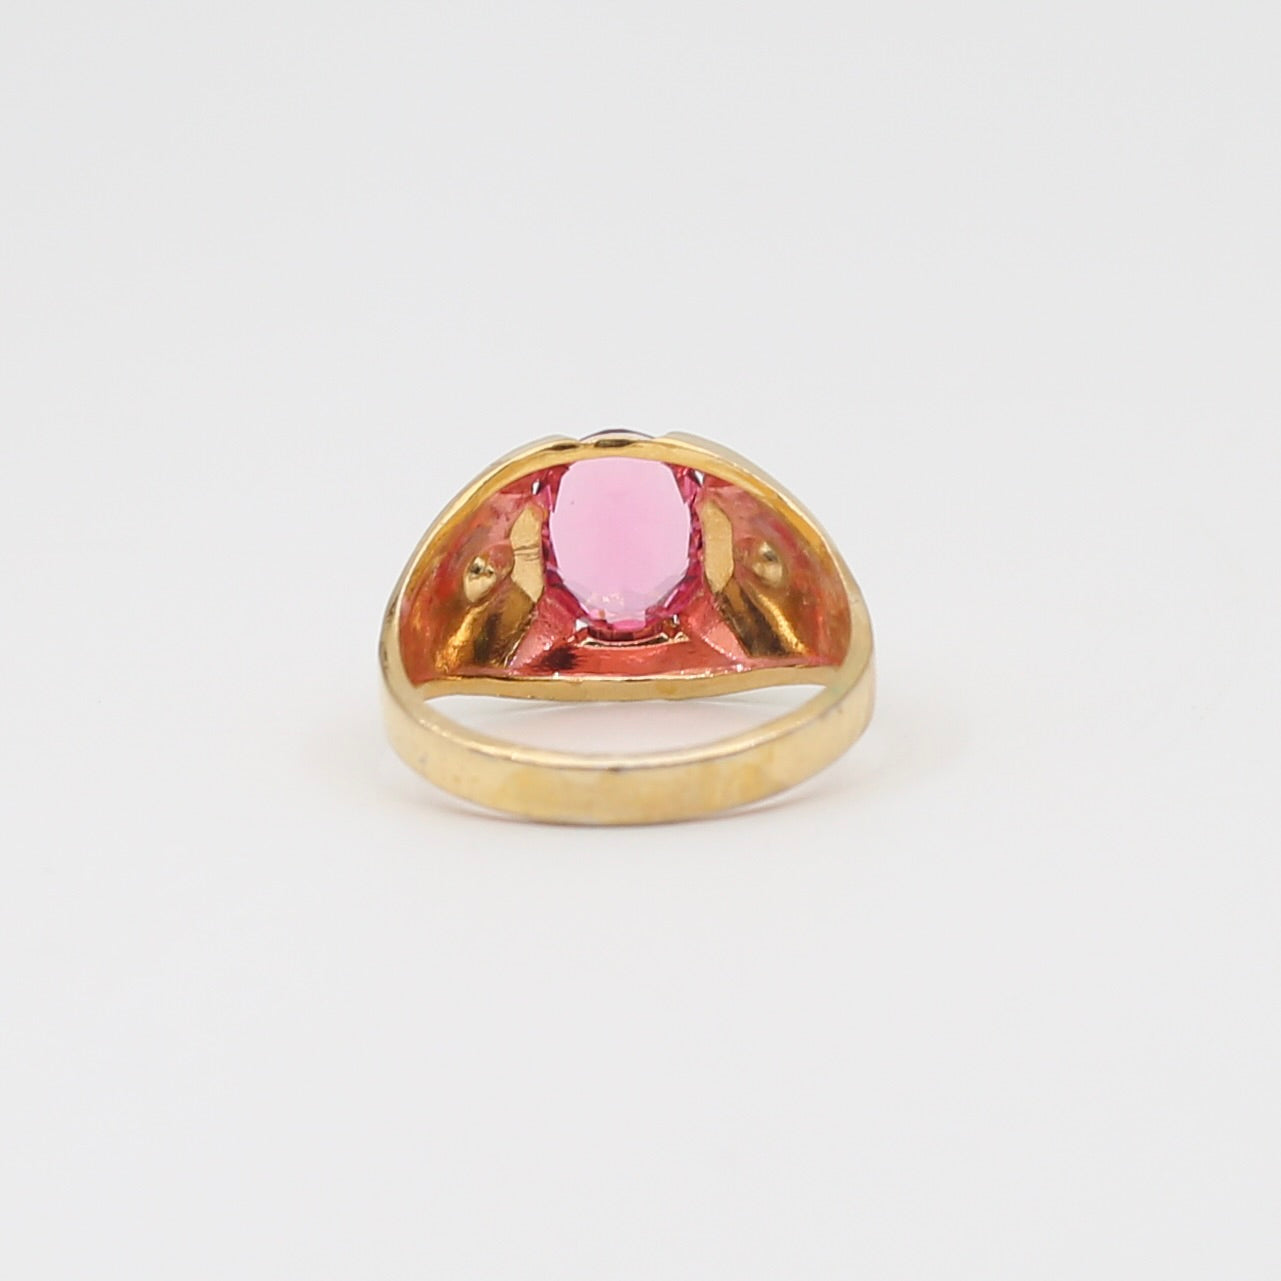 Costume gold toned with pink stone ring